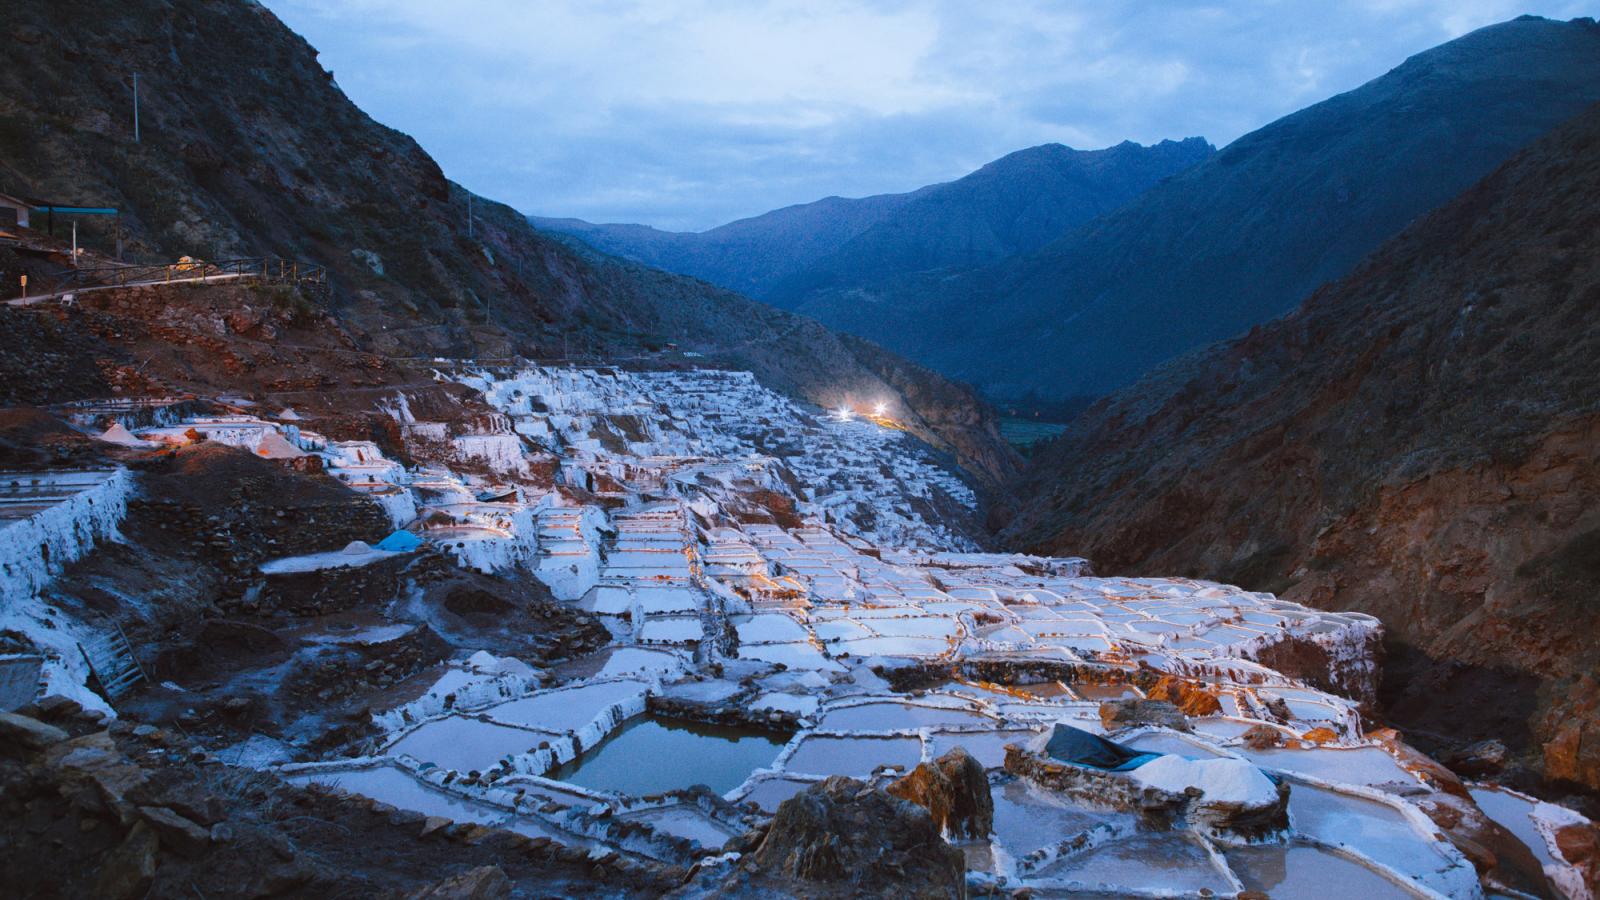 Añay Kachi: Salt Workers of the Peruvian Andes